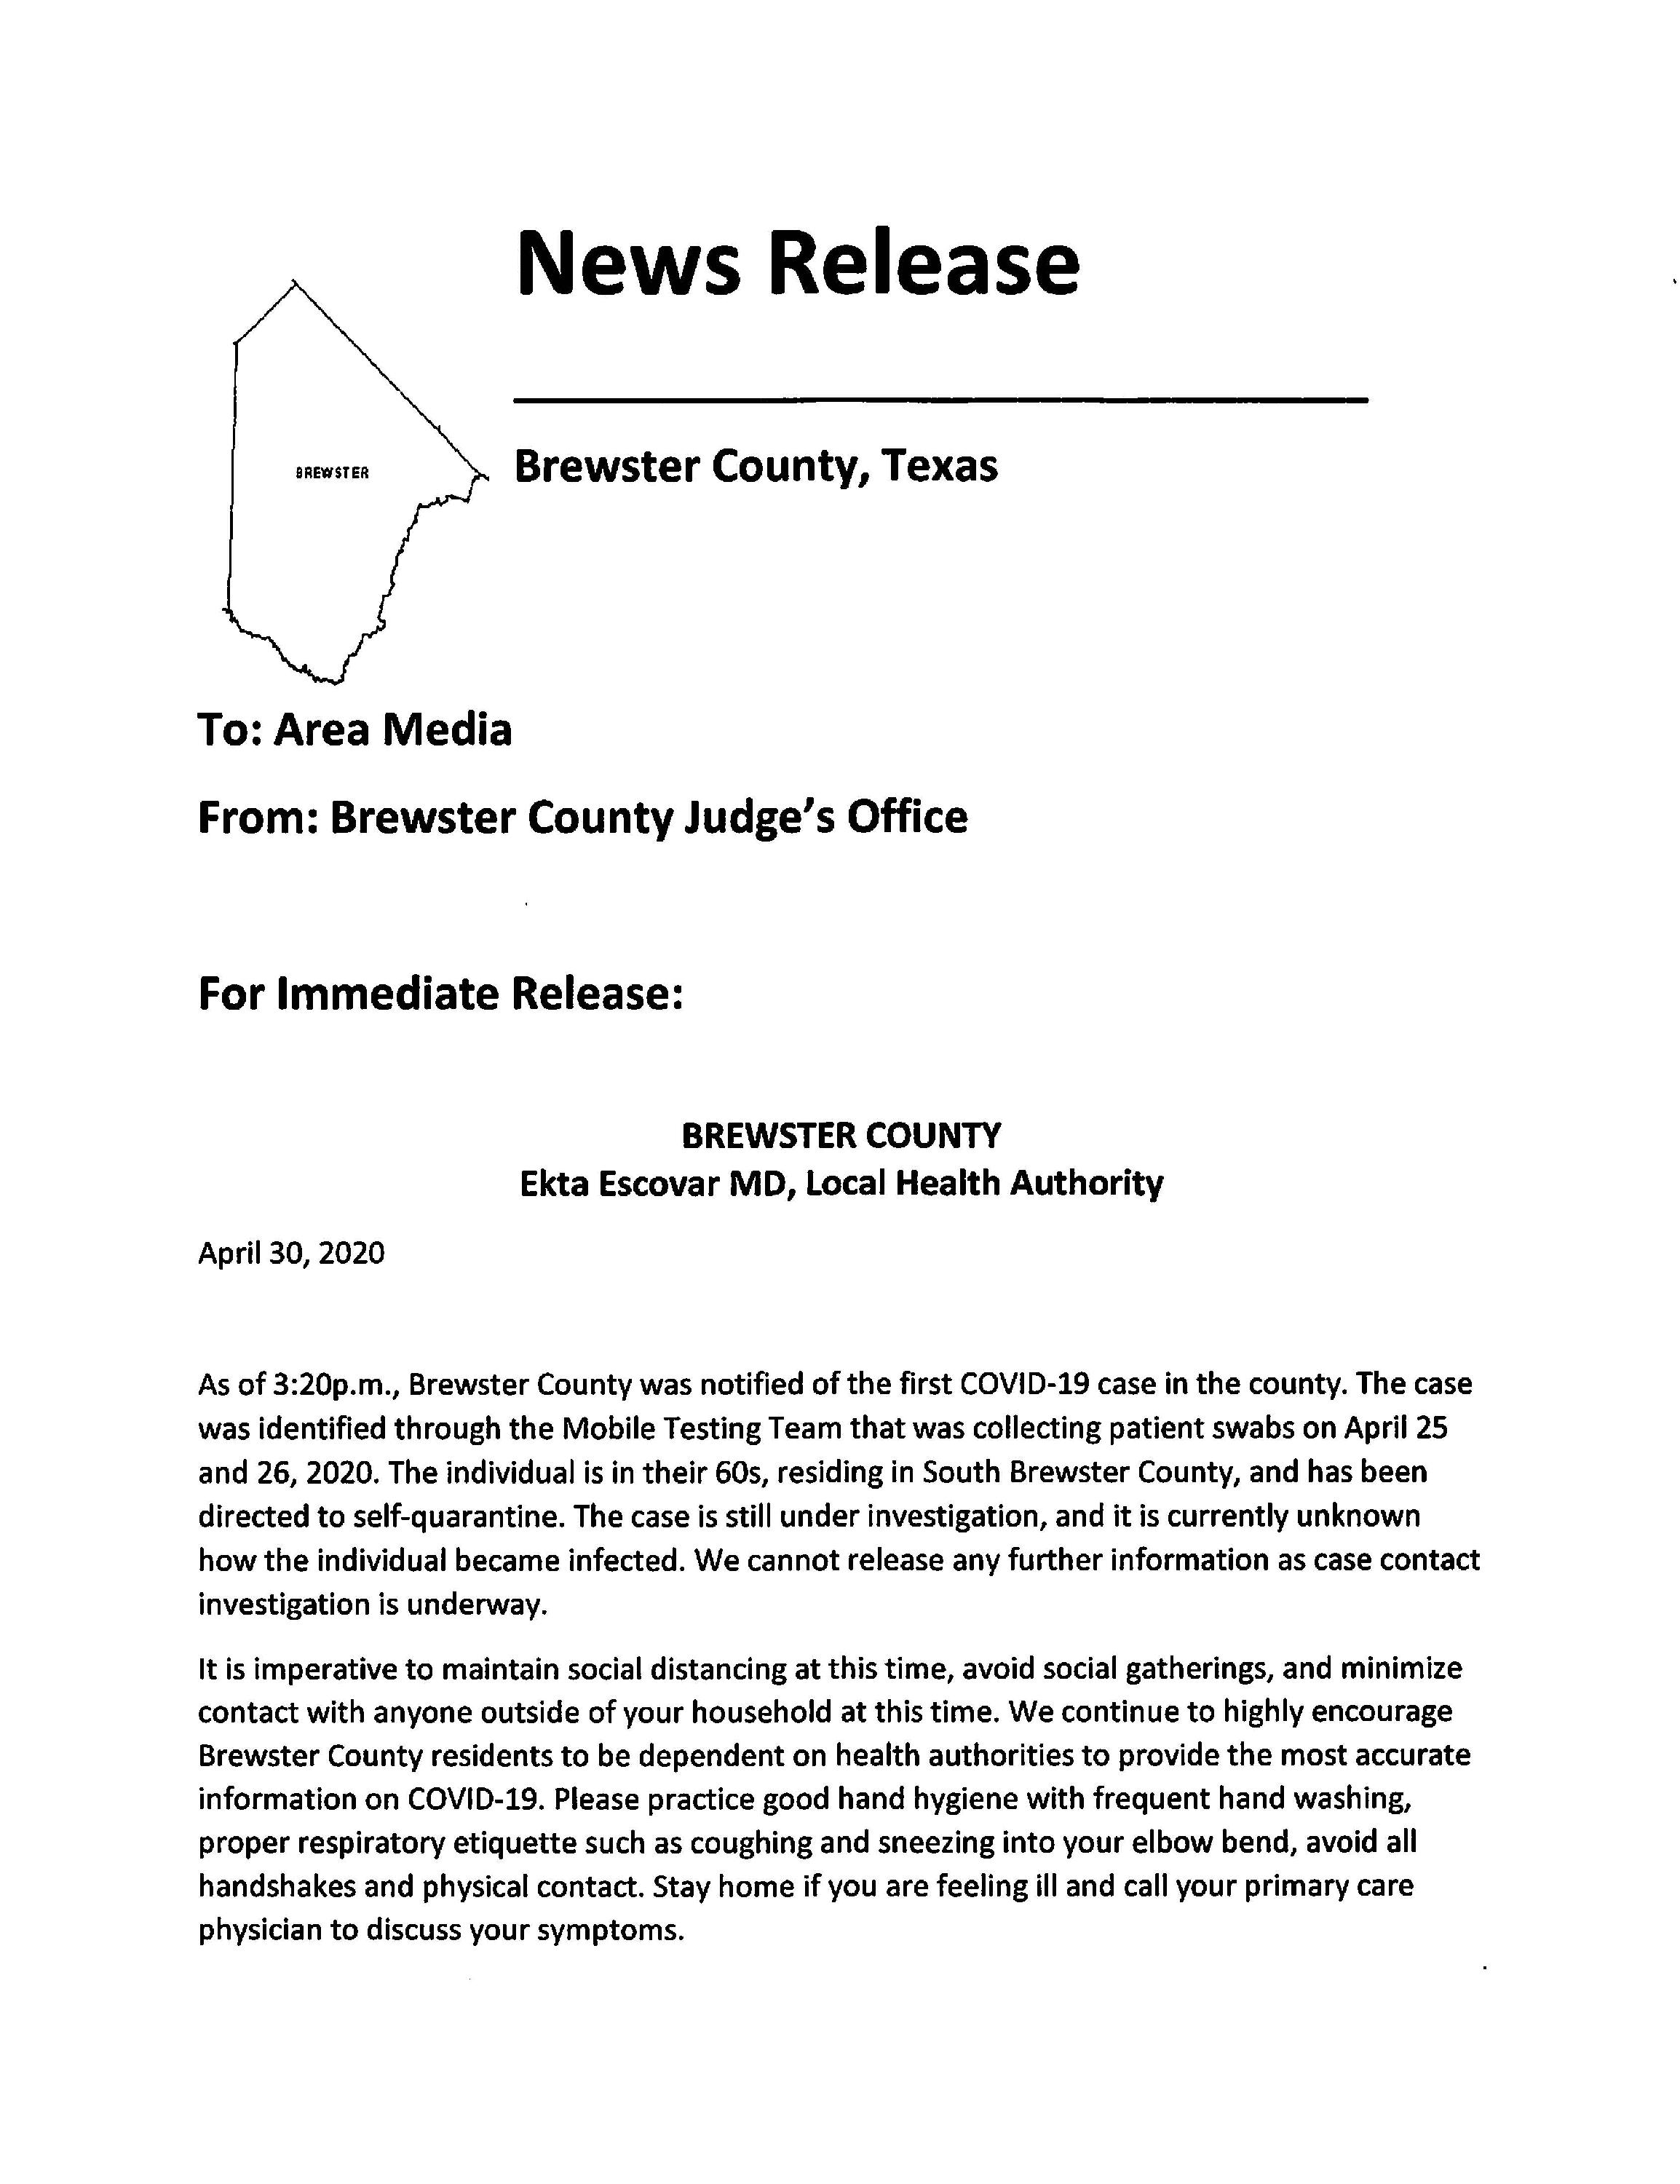 News Release from Dr. Ekta Escovar MD, Local Health Authority